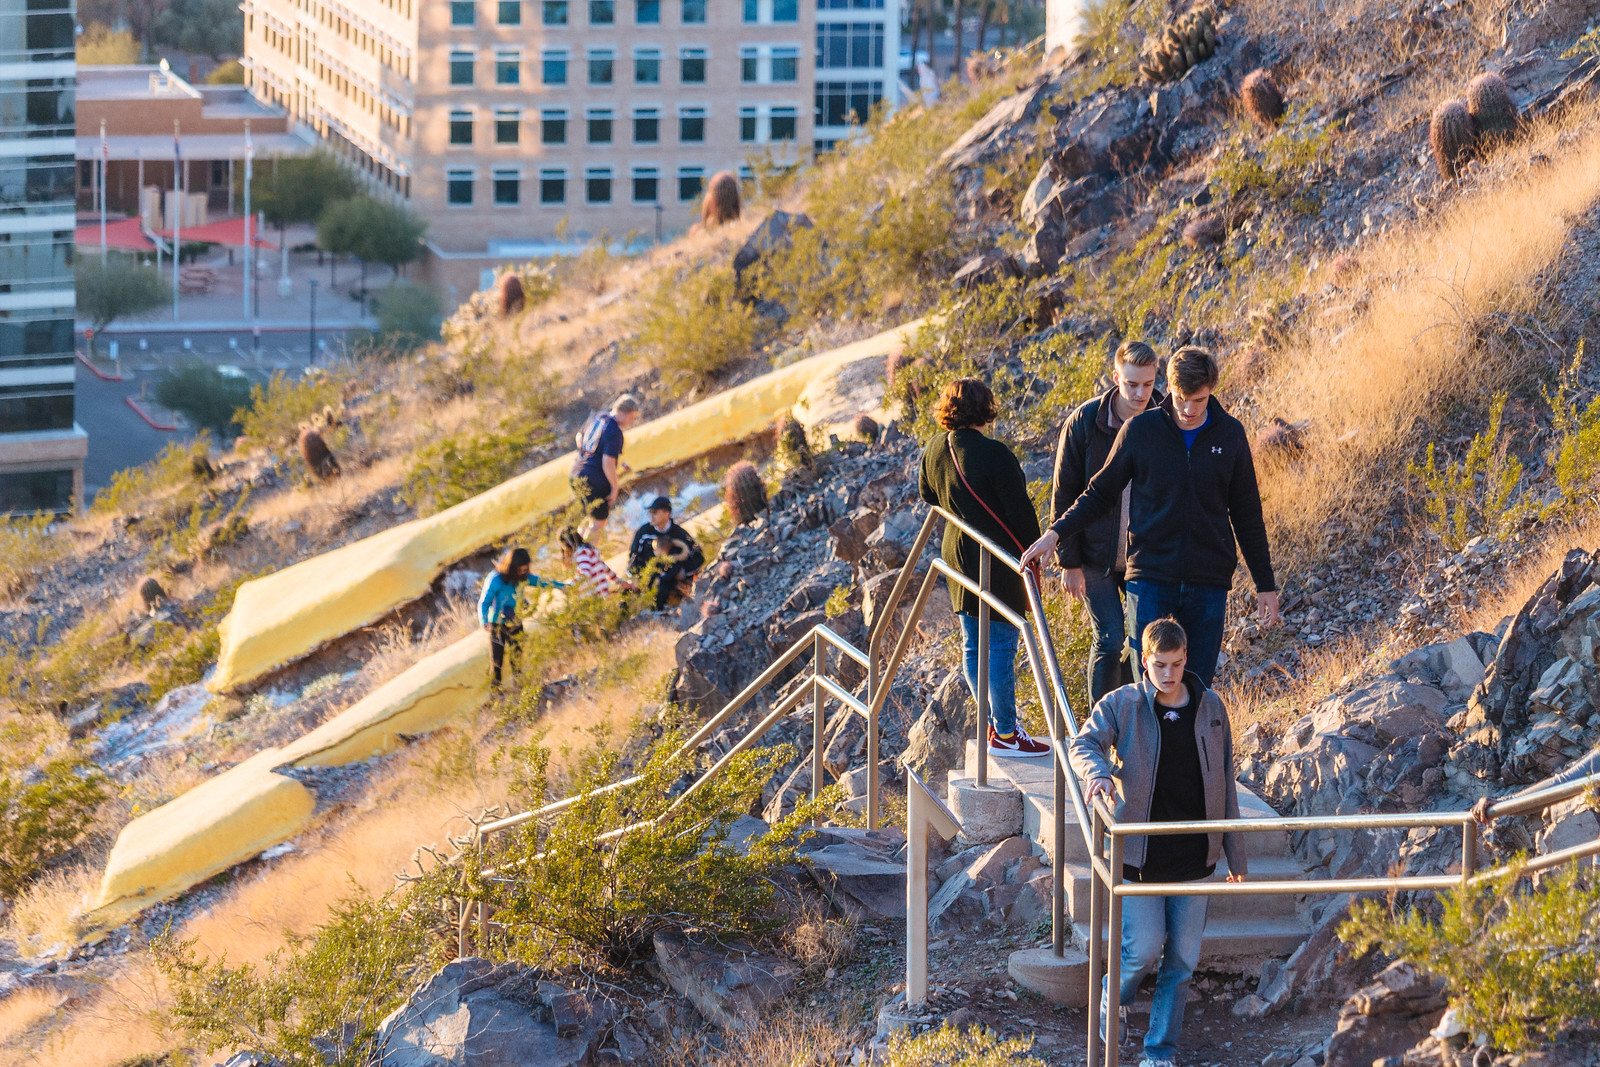 Hikers hold onto railings as they climb up the side of a mountain with a large letter A in Tempe, Arizona